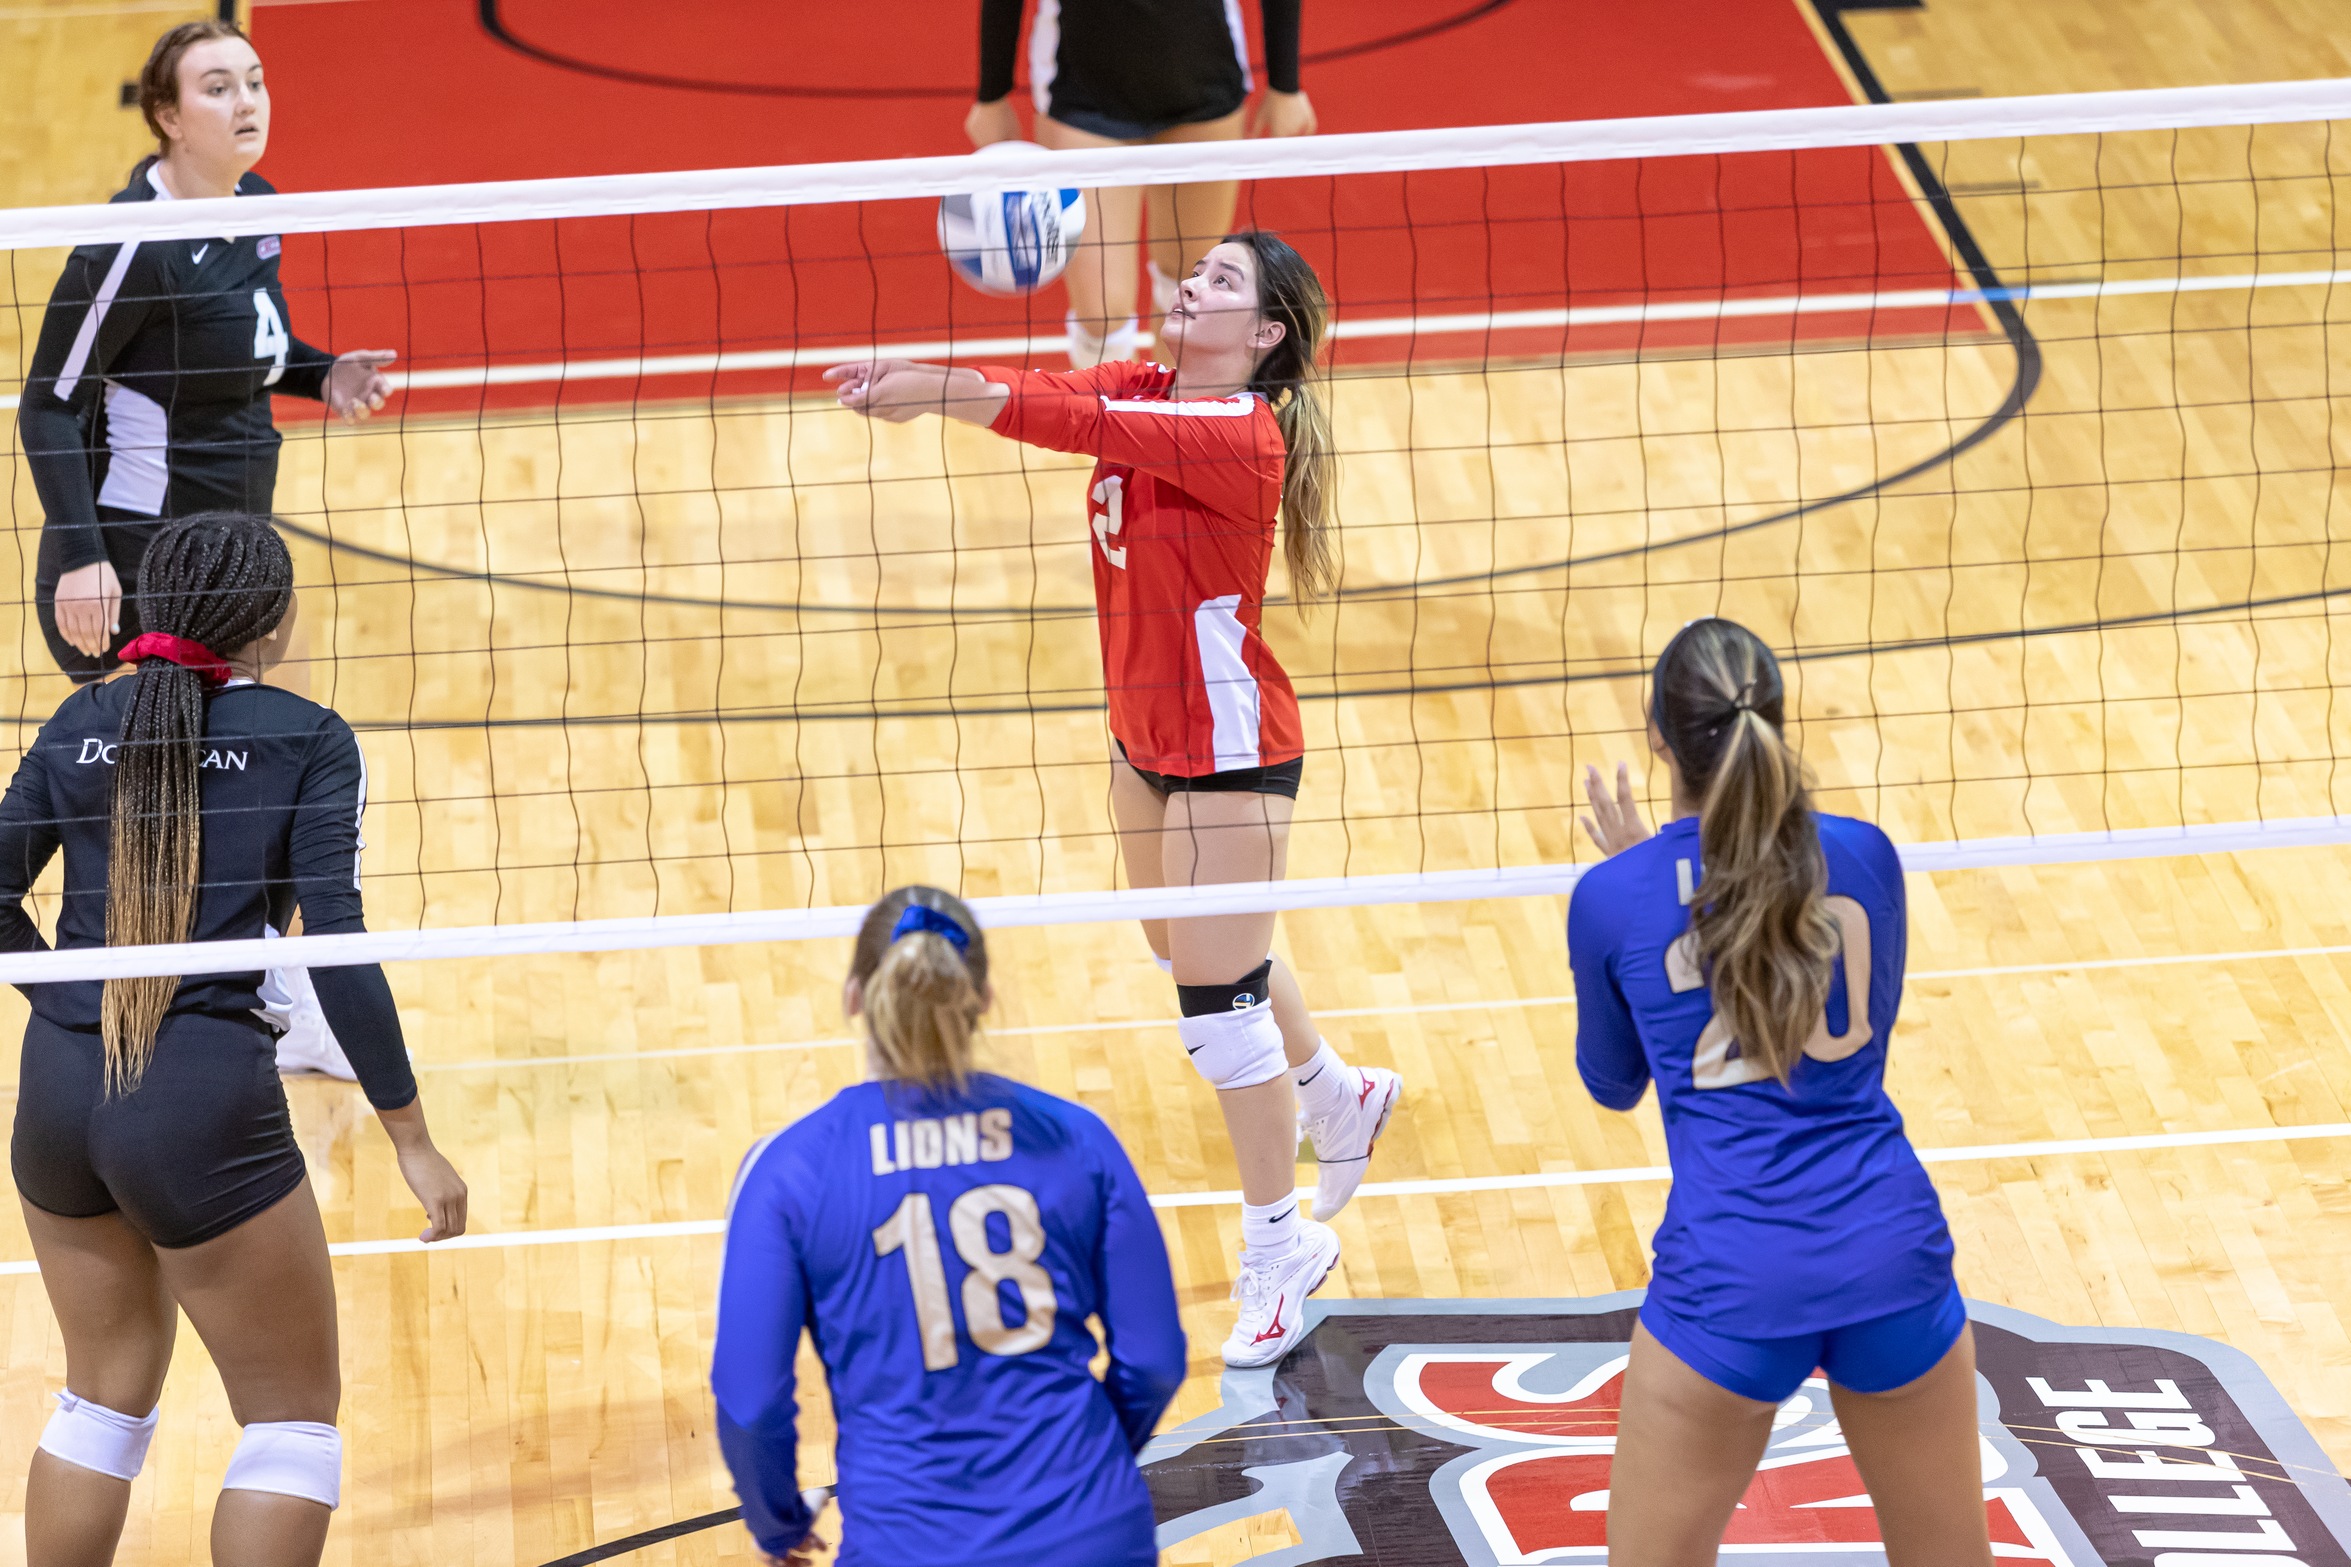 WOMEN'S VOLLEYBALL TURNED AWAY IN SEASON OPENER BY THE COLLEGE OF SAINT ROSE